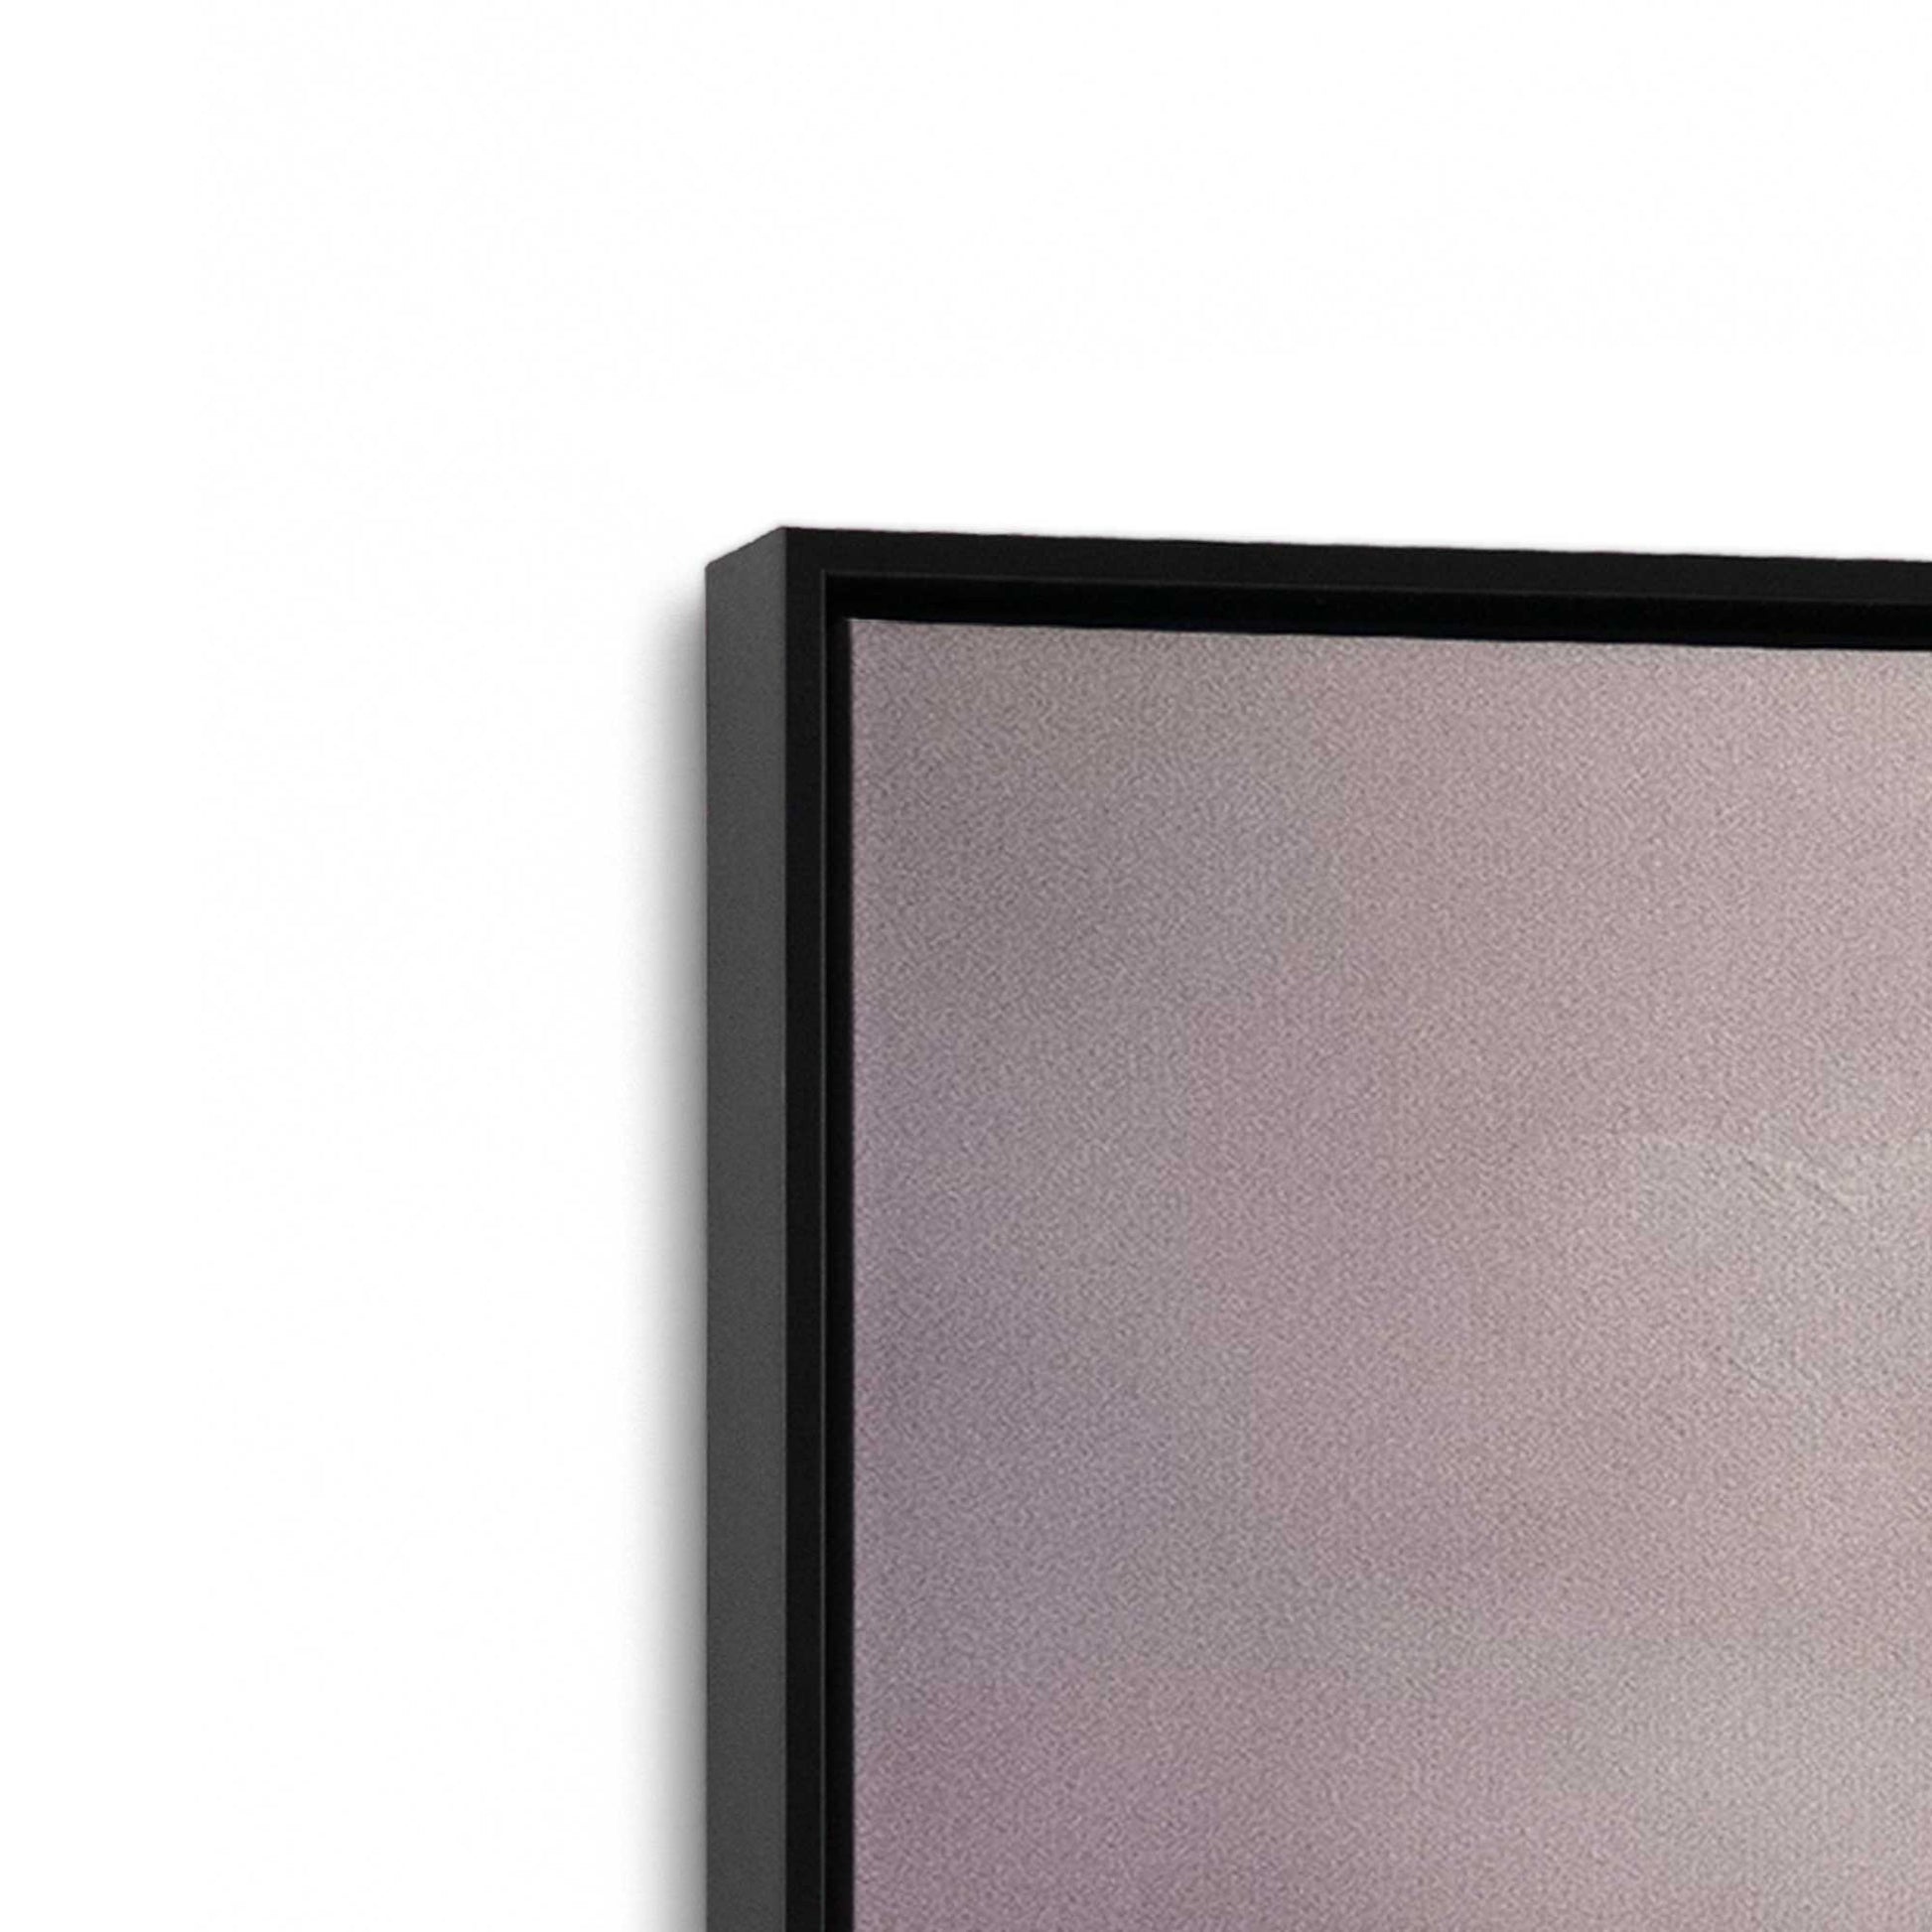 [Color:Satin Black], Picture of the corner of the art